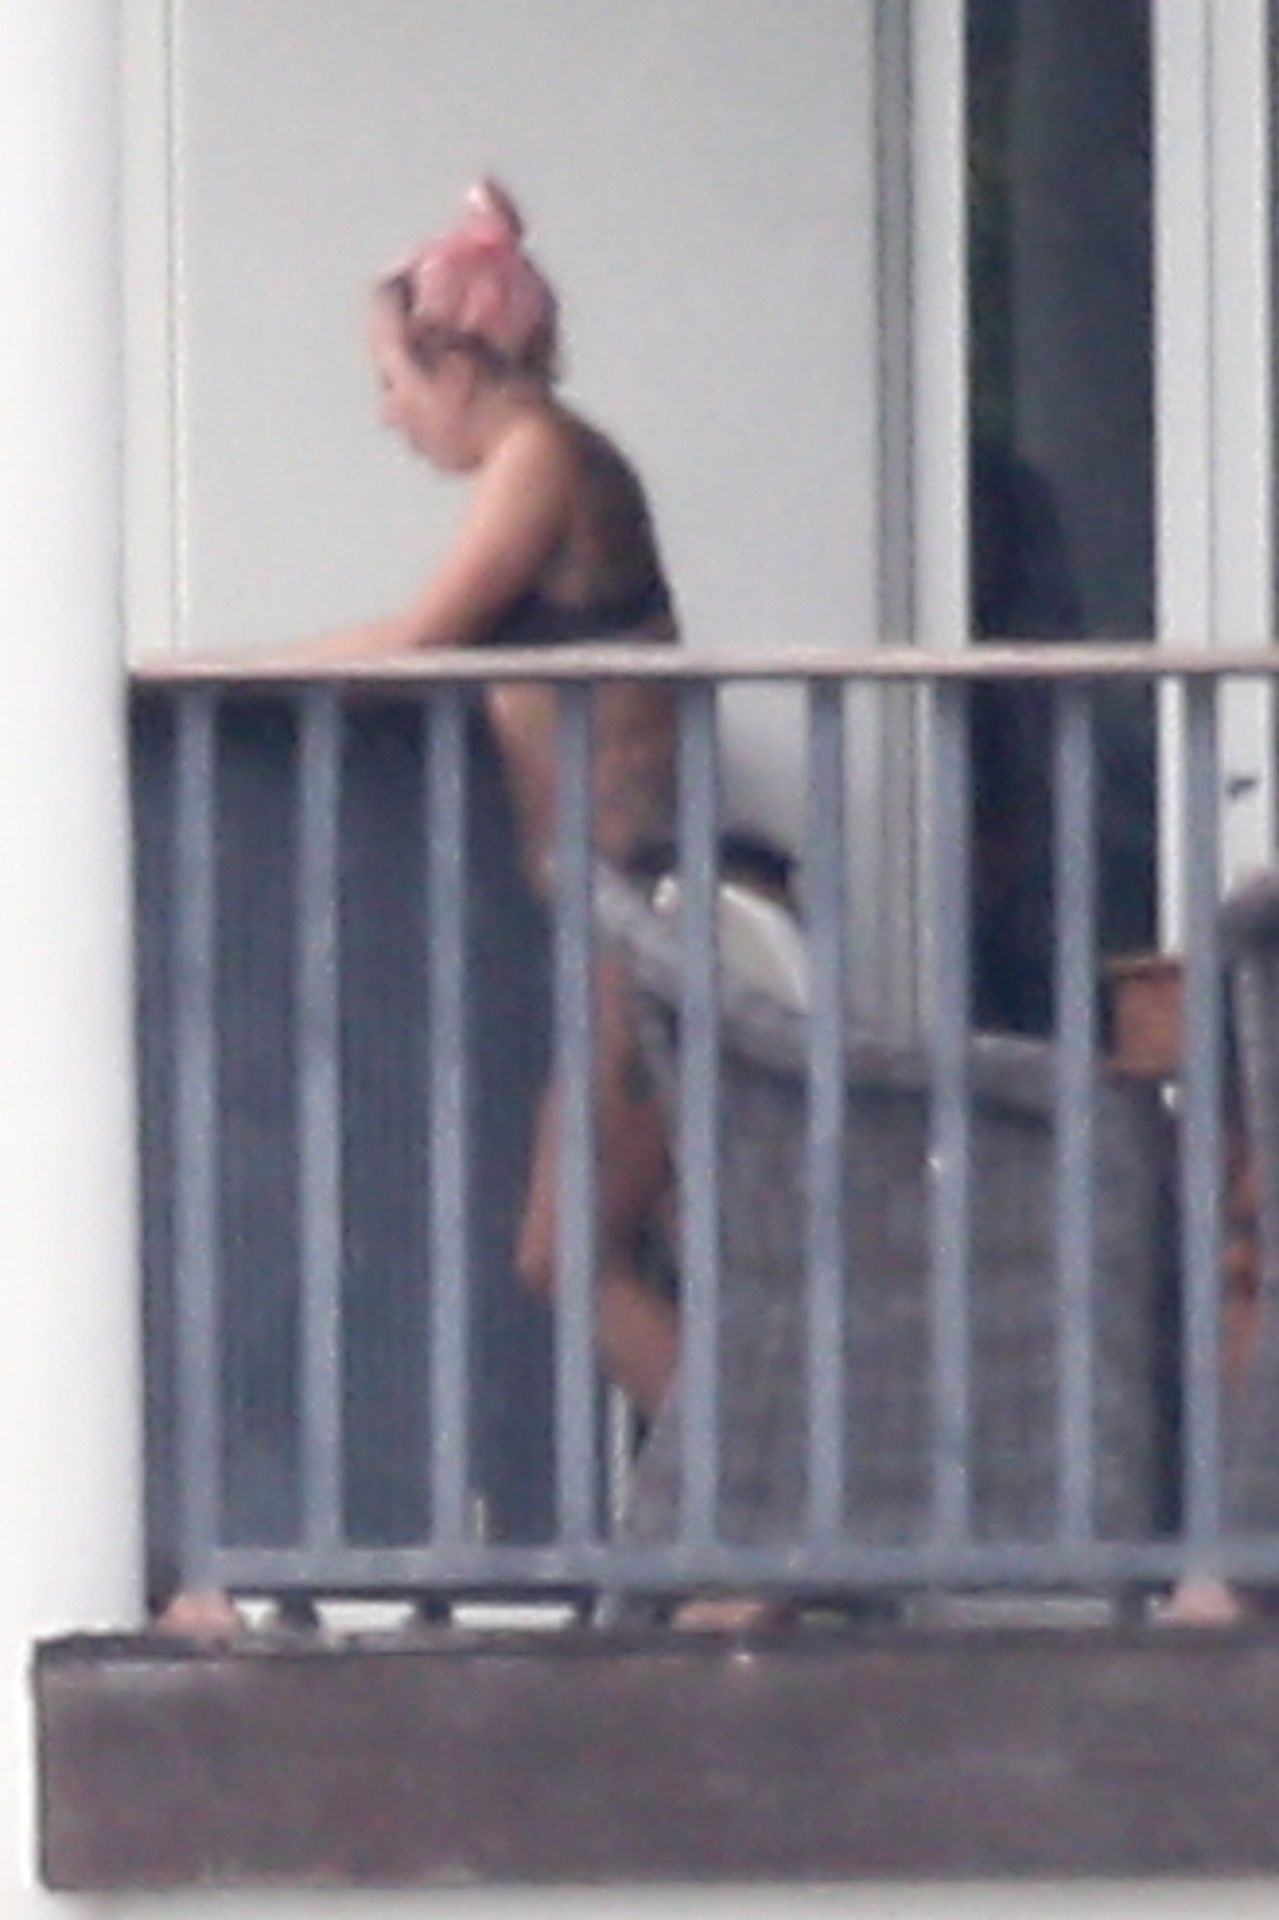 Lady Gaga Enjoys the Views from her Miami Balcony in her Underwear (16 Photos)